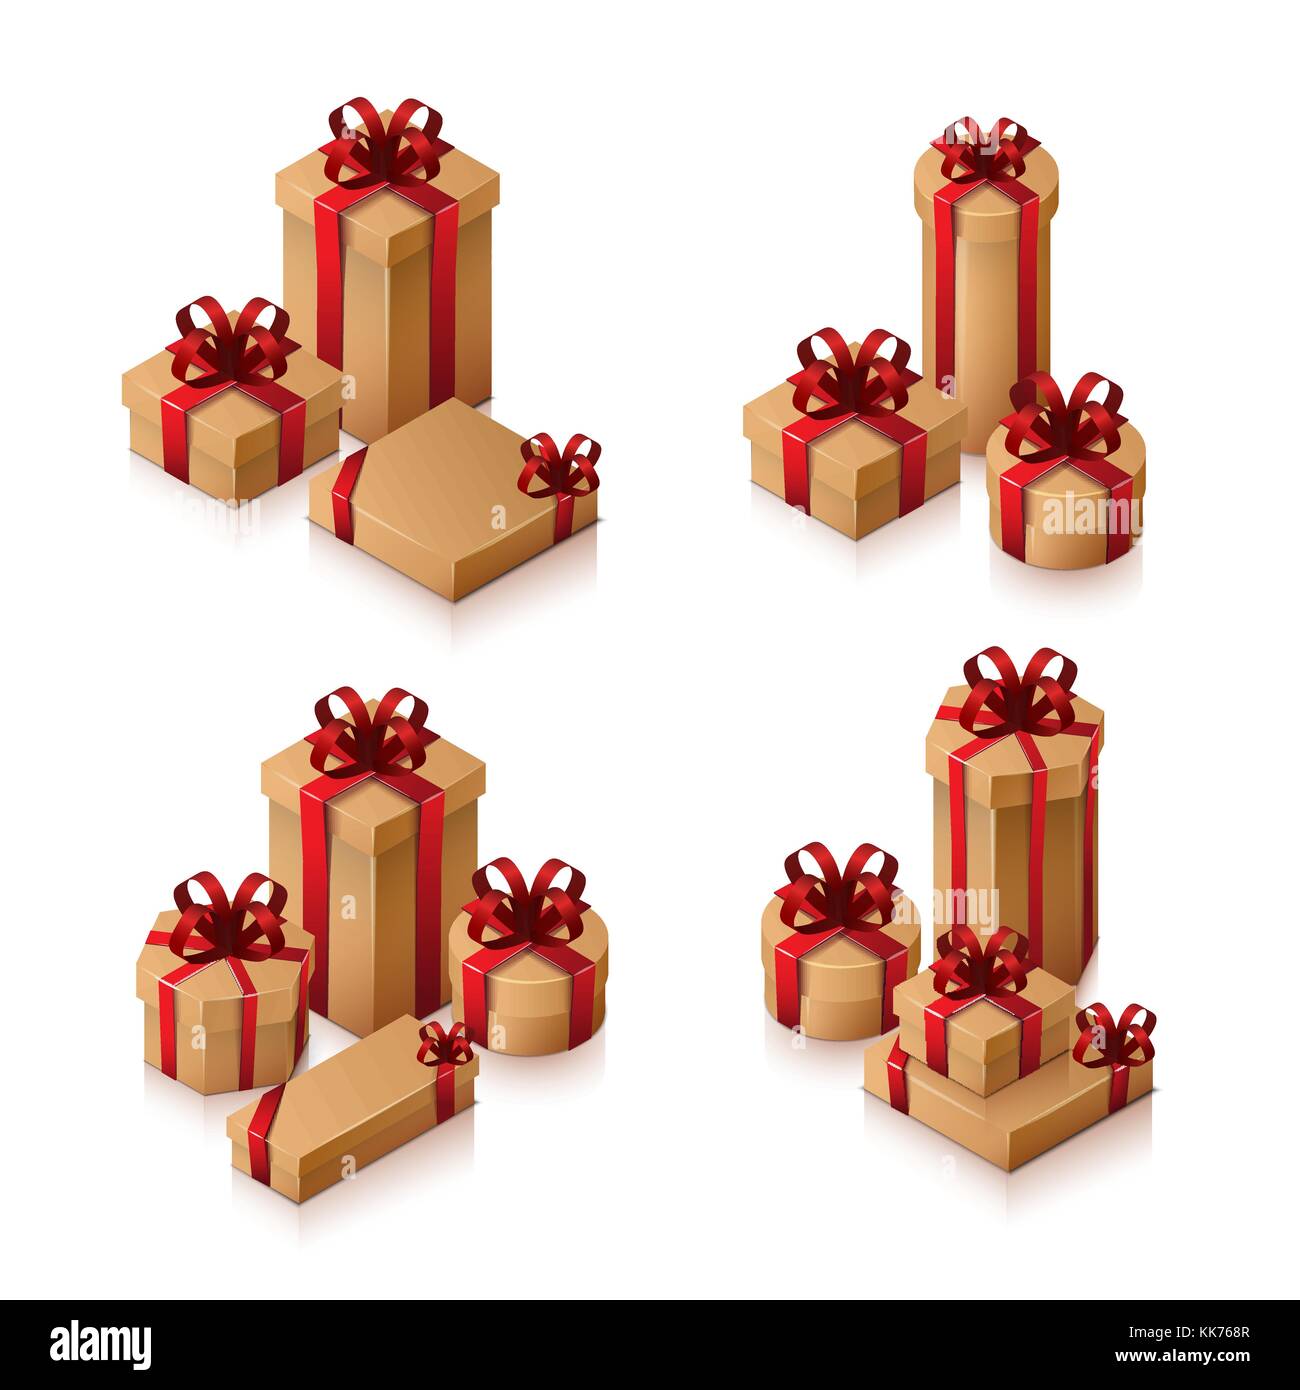 Set of gift boxes with bows and ribbons. Isometric illustration on white background. 3D realistic icons. Vector Stock Vector